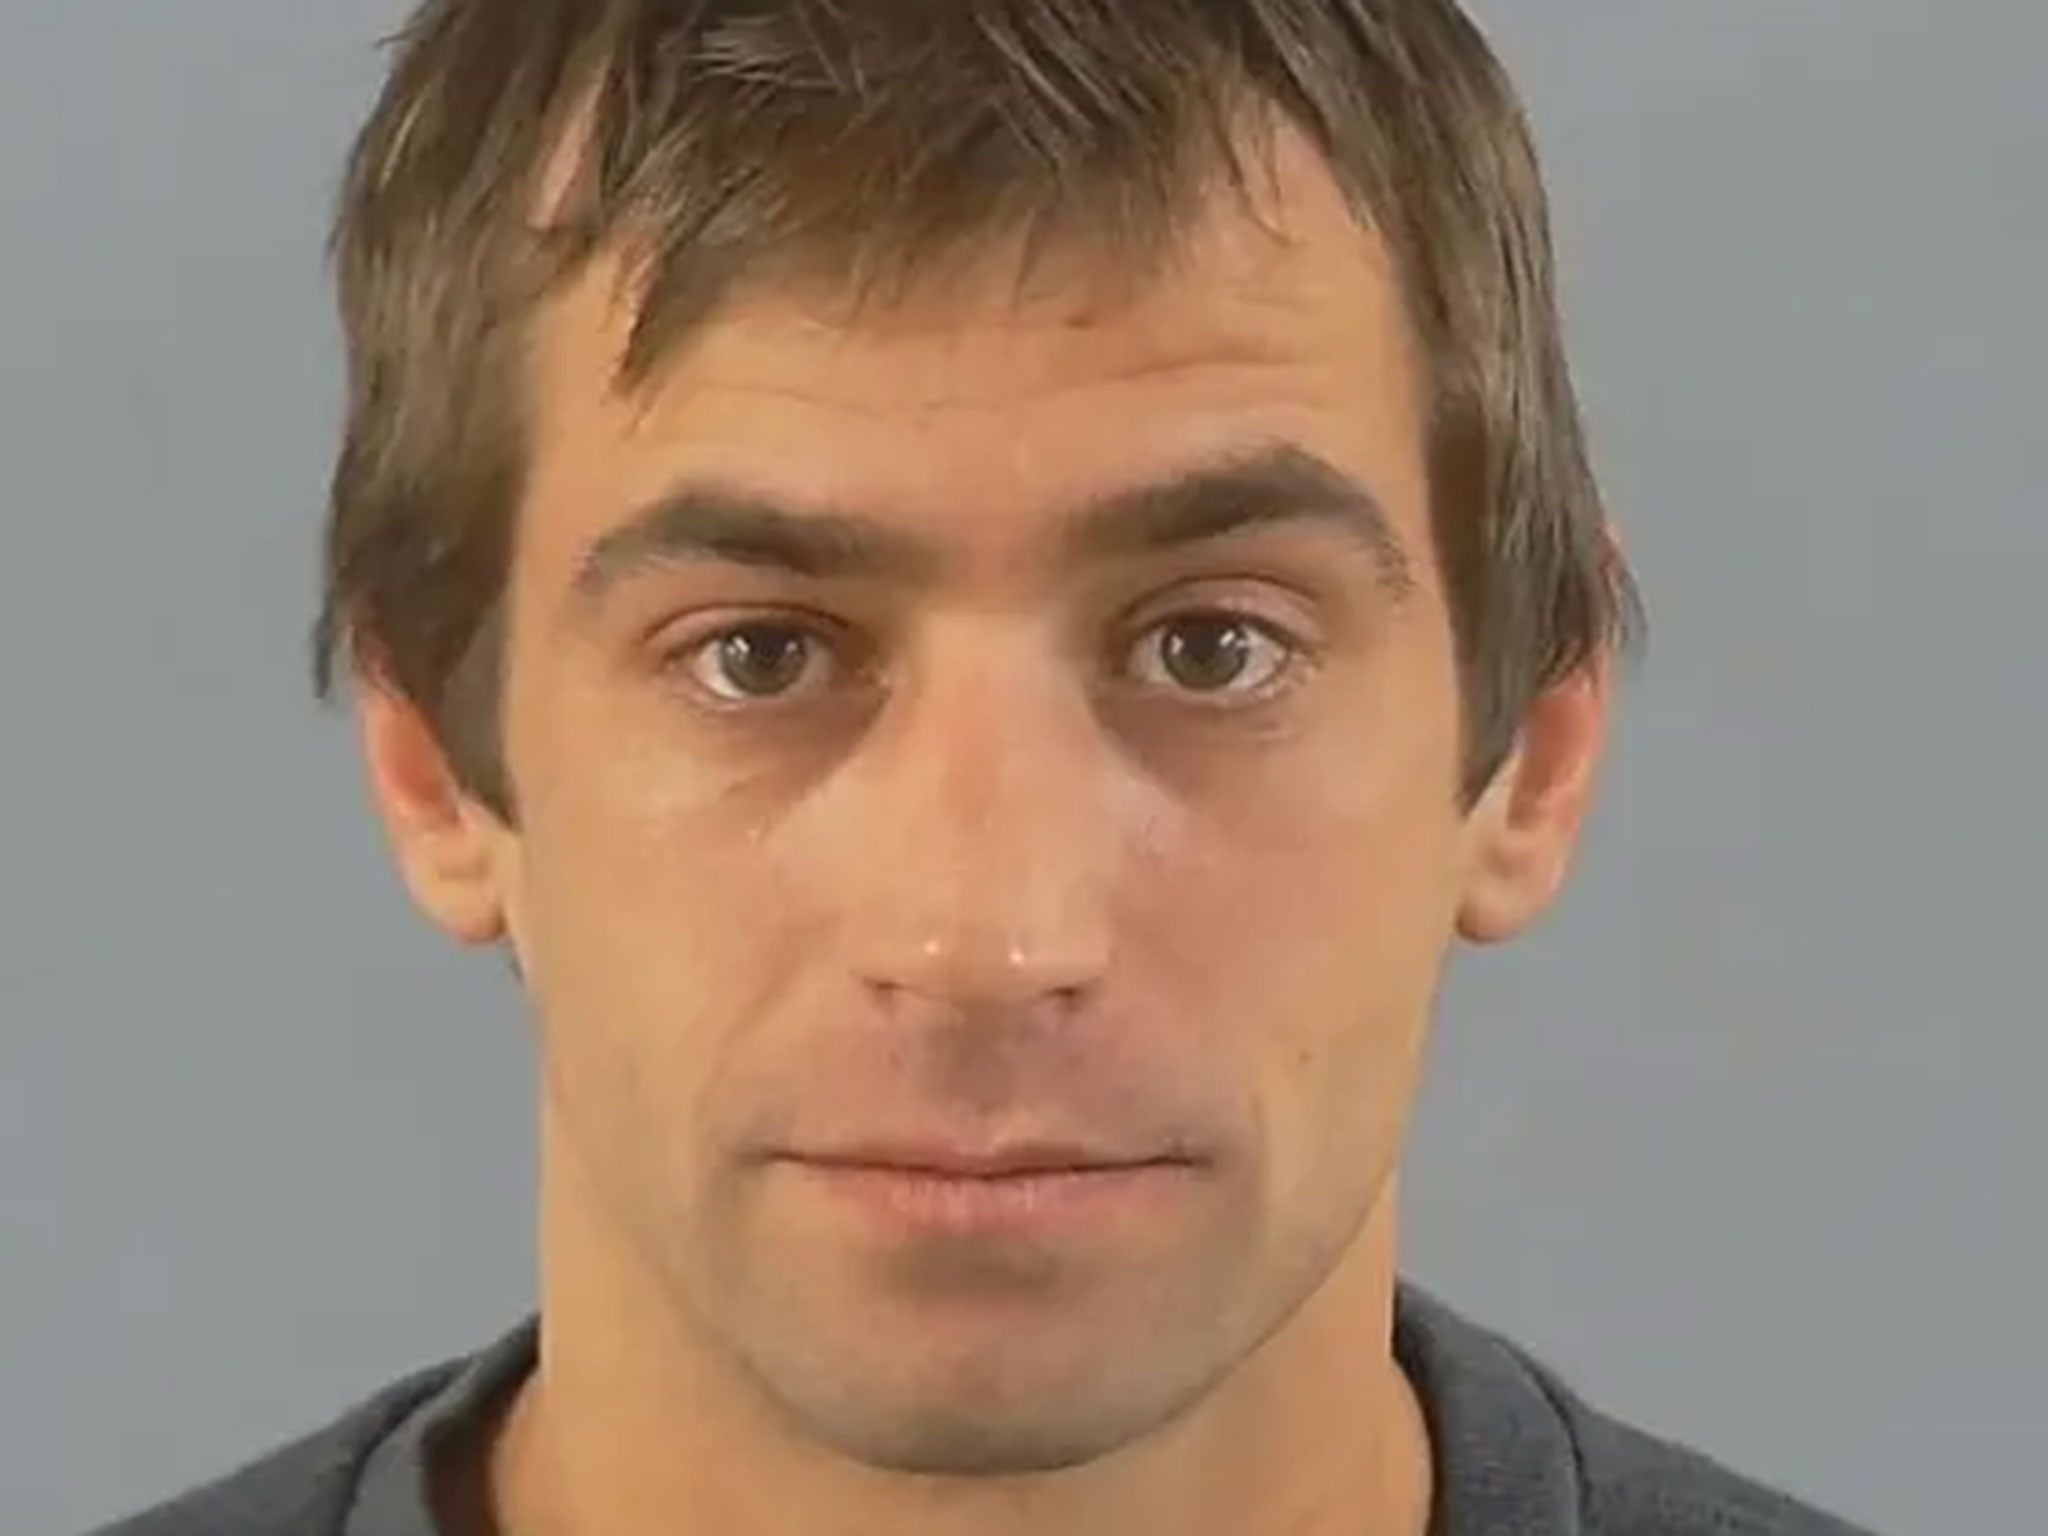 Peter Fox, 32, is on the run after being arrested for aggravated burglary